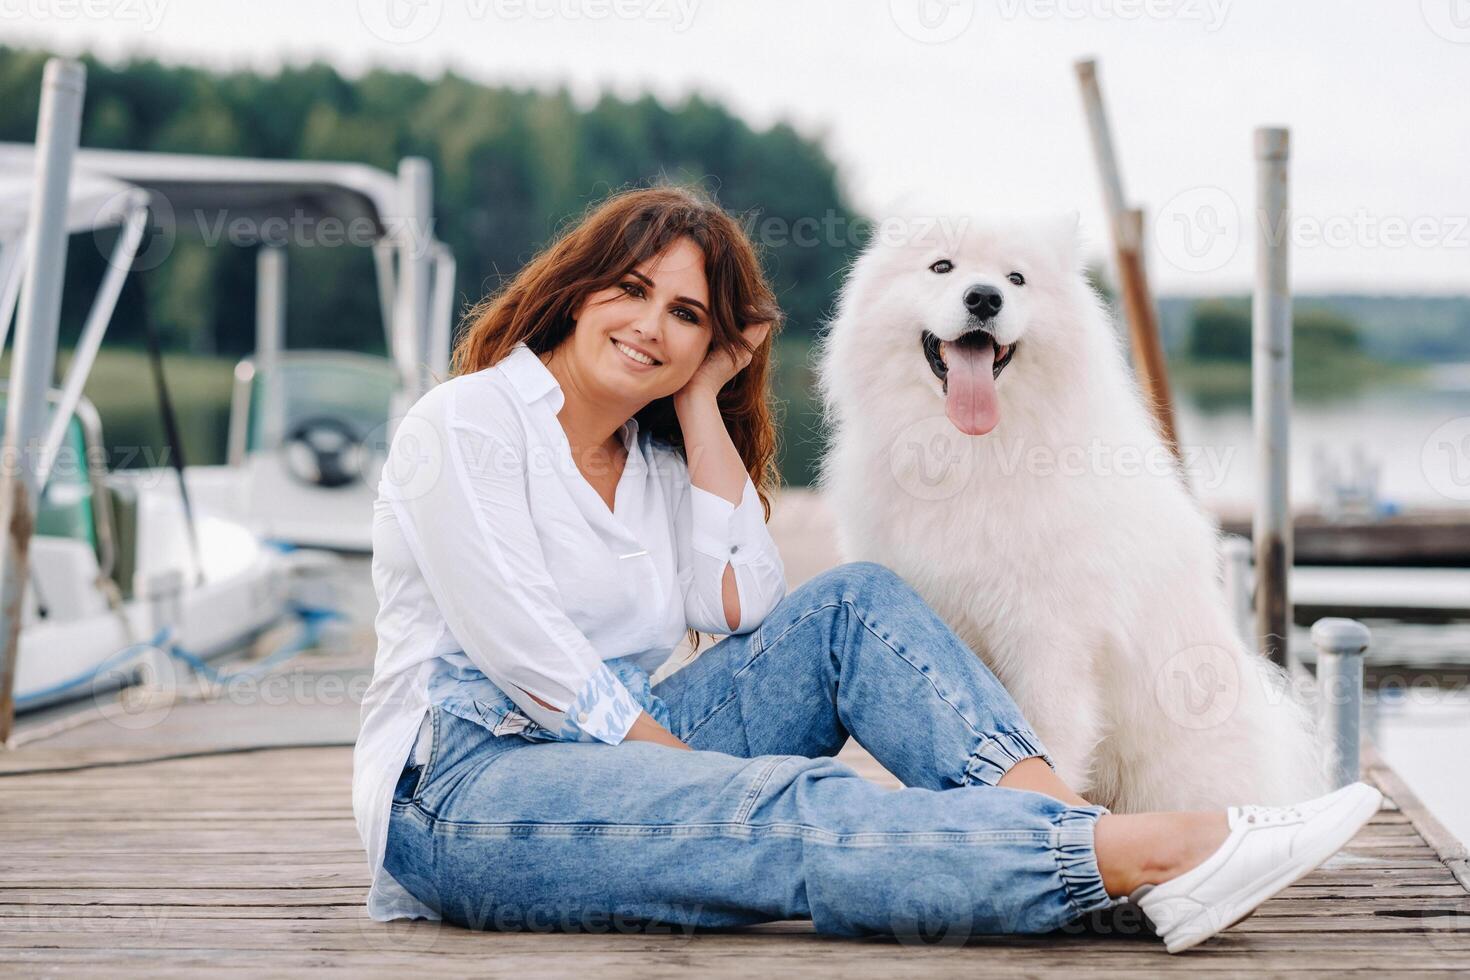 a happy woman with a big white dog sits on a pier by the sea at sunset photo